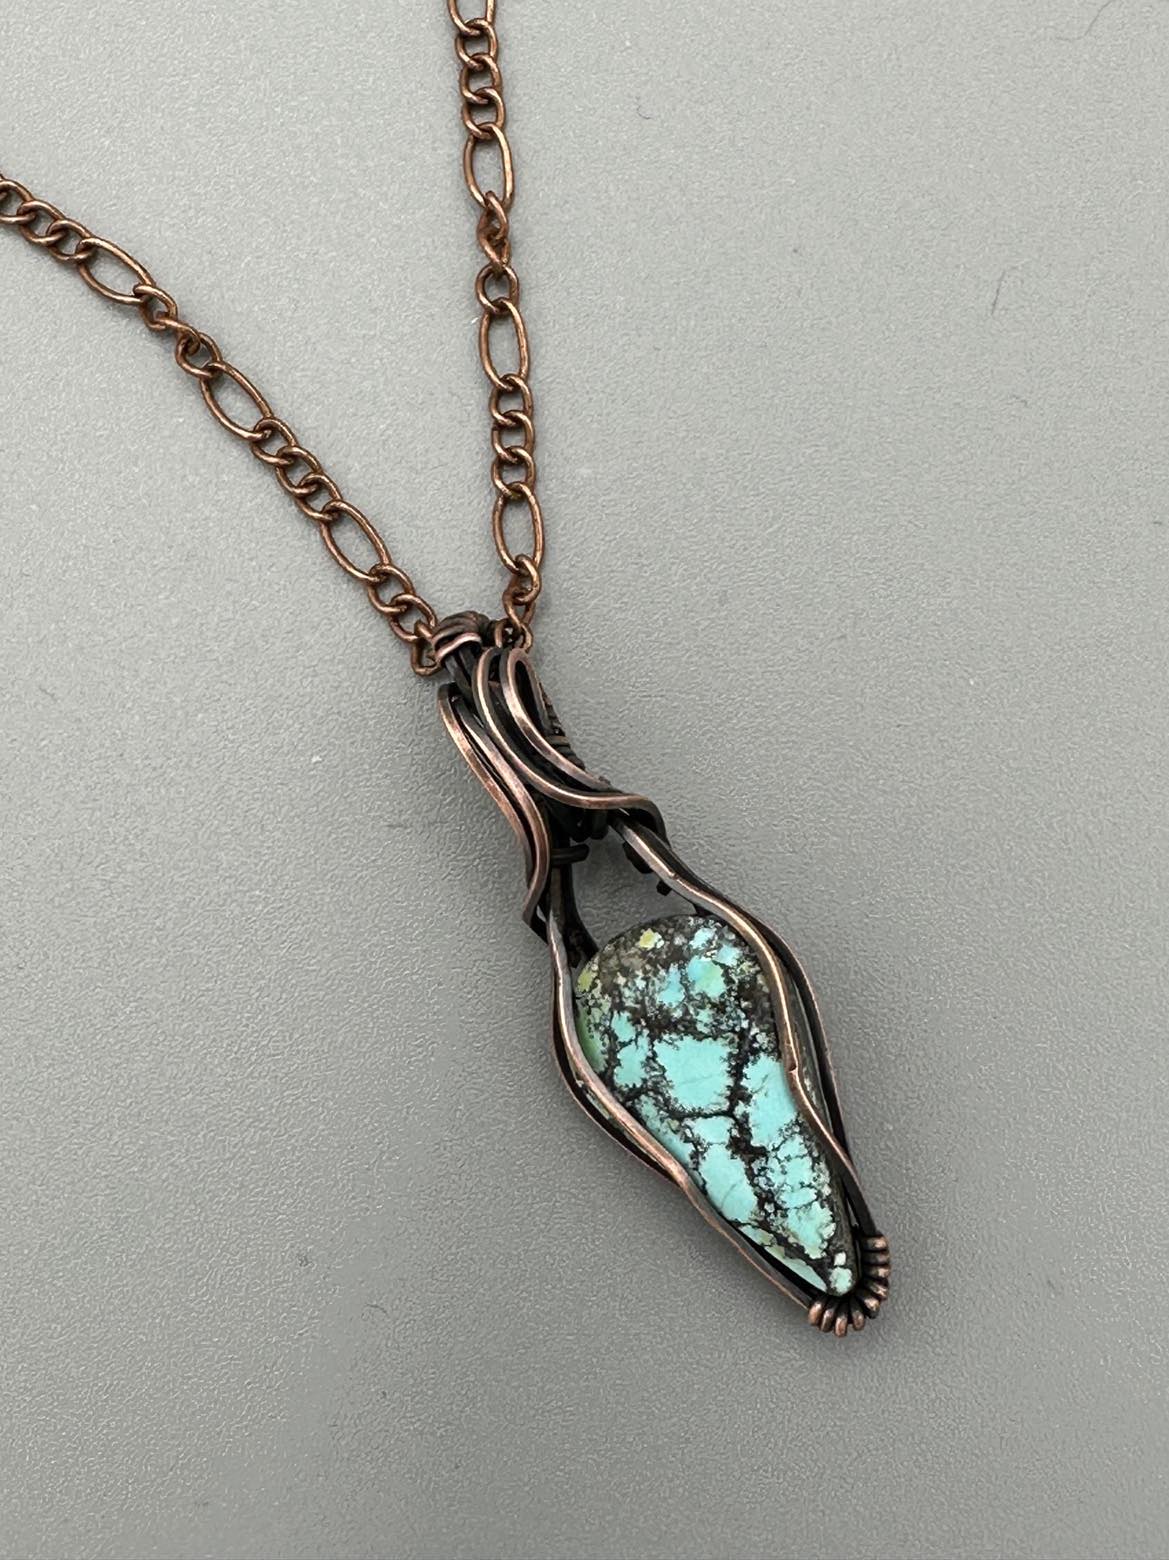 Turquoise Teardrop Pendant Wrapped In Oxidized Copper Wire